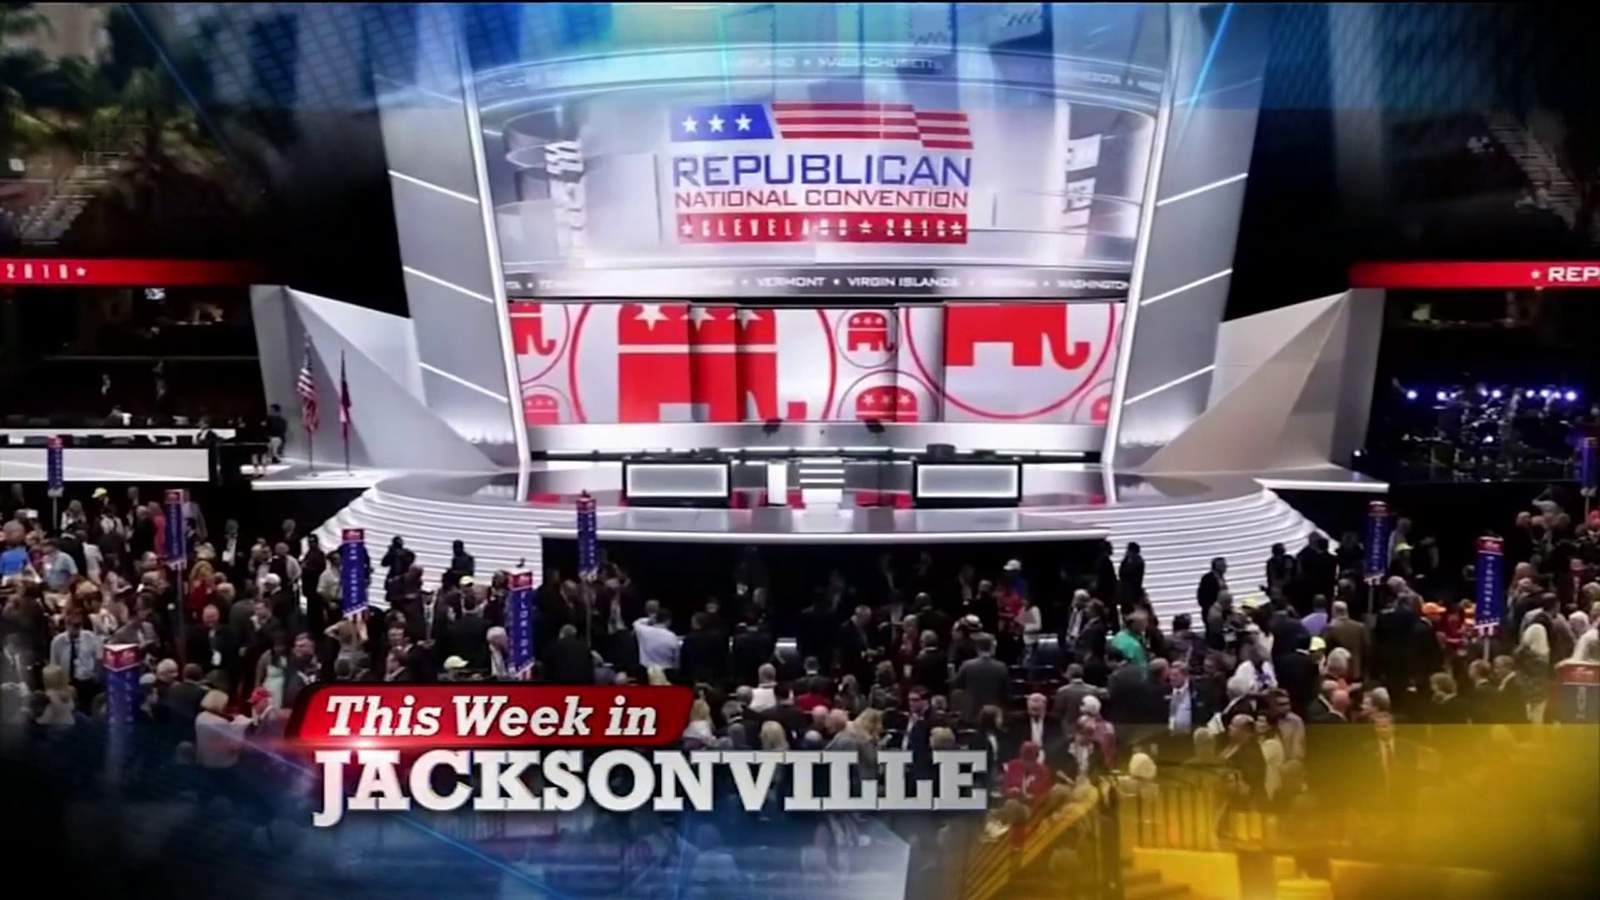 Sales tax referendum for aging schools; Republican National Convention in Jacksonville; Moving forward on race relations